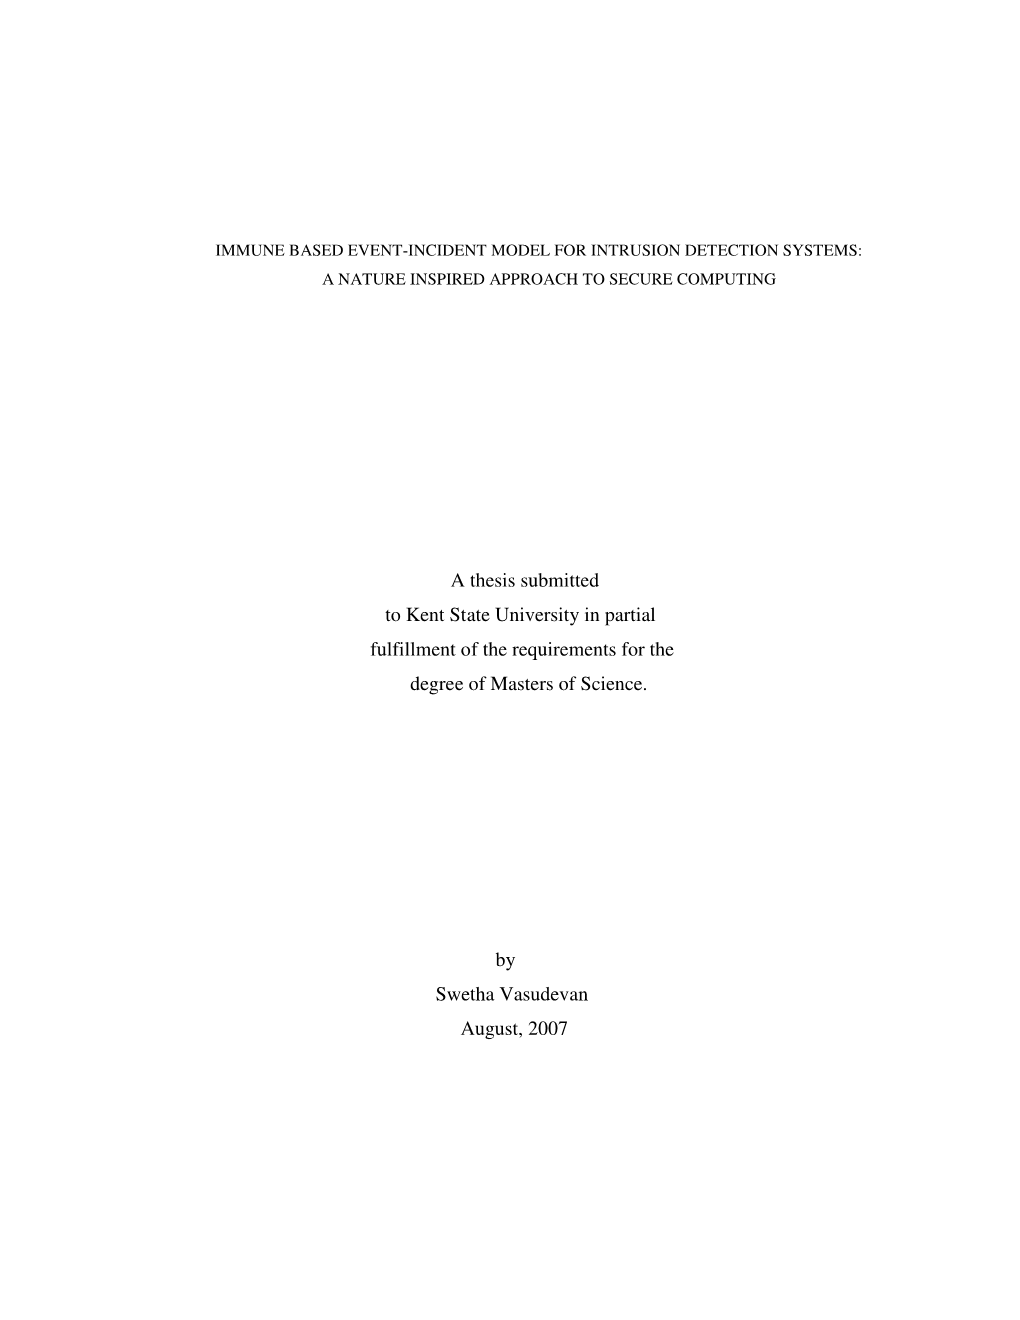 A Thesis Submitted to Kent State University in Partial Fulfillment of the Requirements for the Degree of Masters of Science